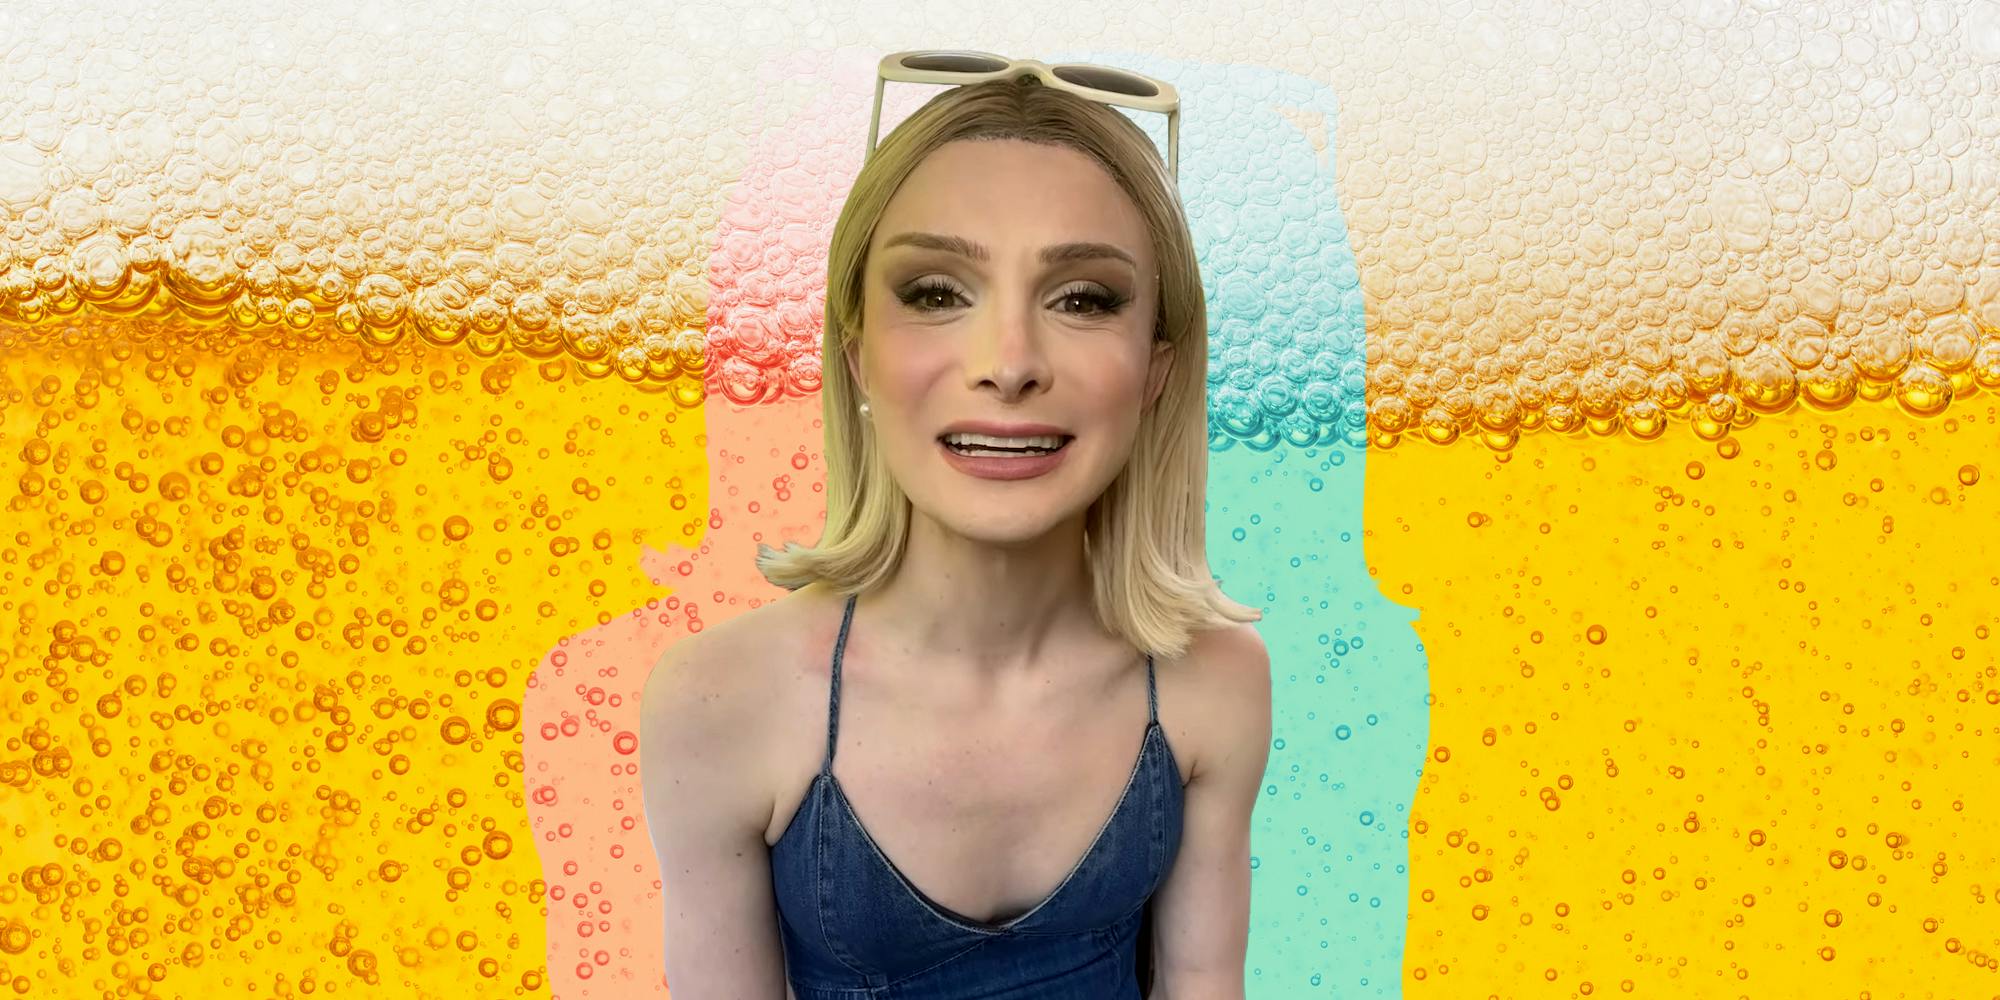 Dylan Mulvaney Speaks Out About Bud Light’s Neglect in the Wake of Transphobic Hate Campaign Against Her